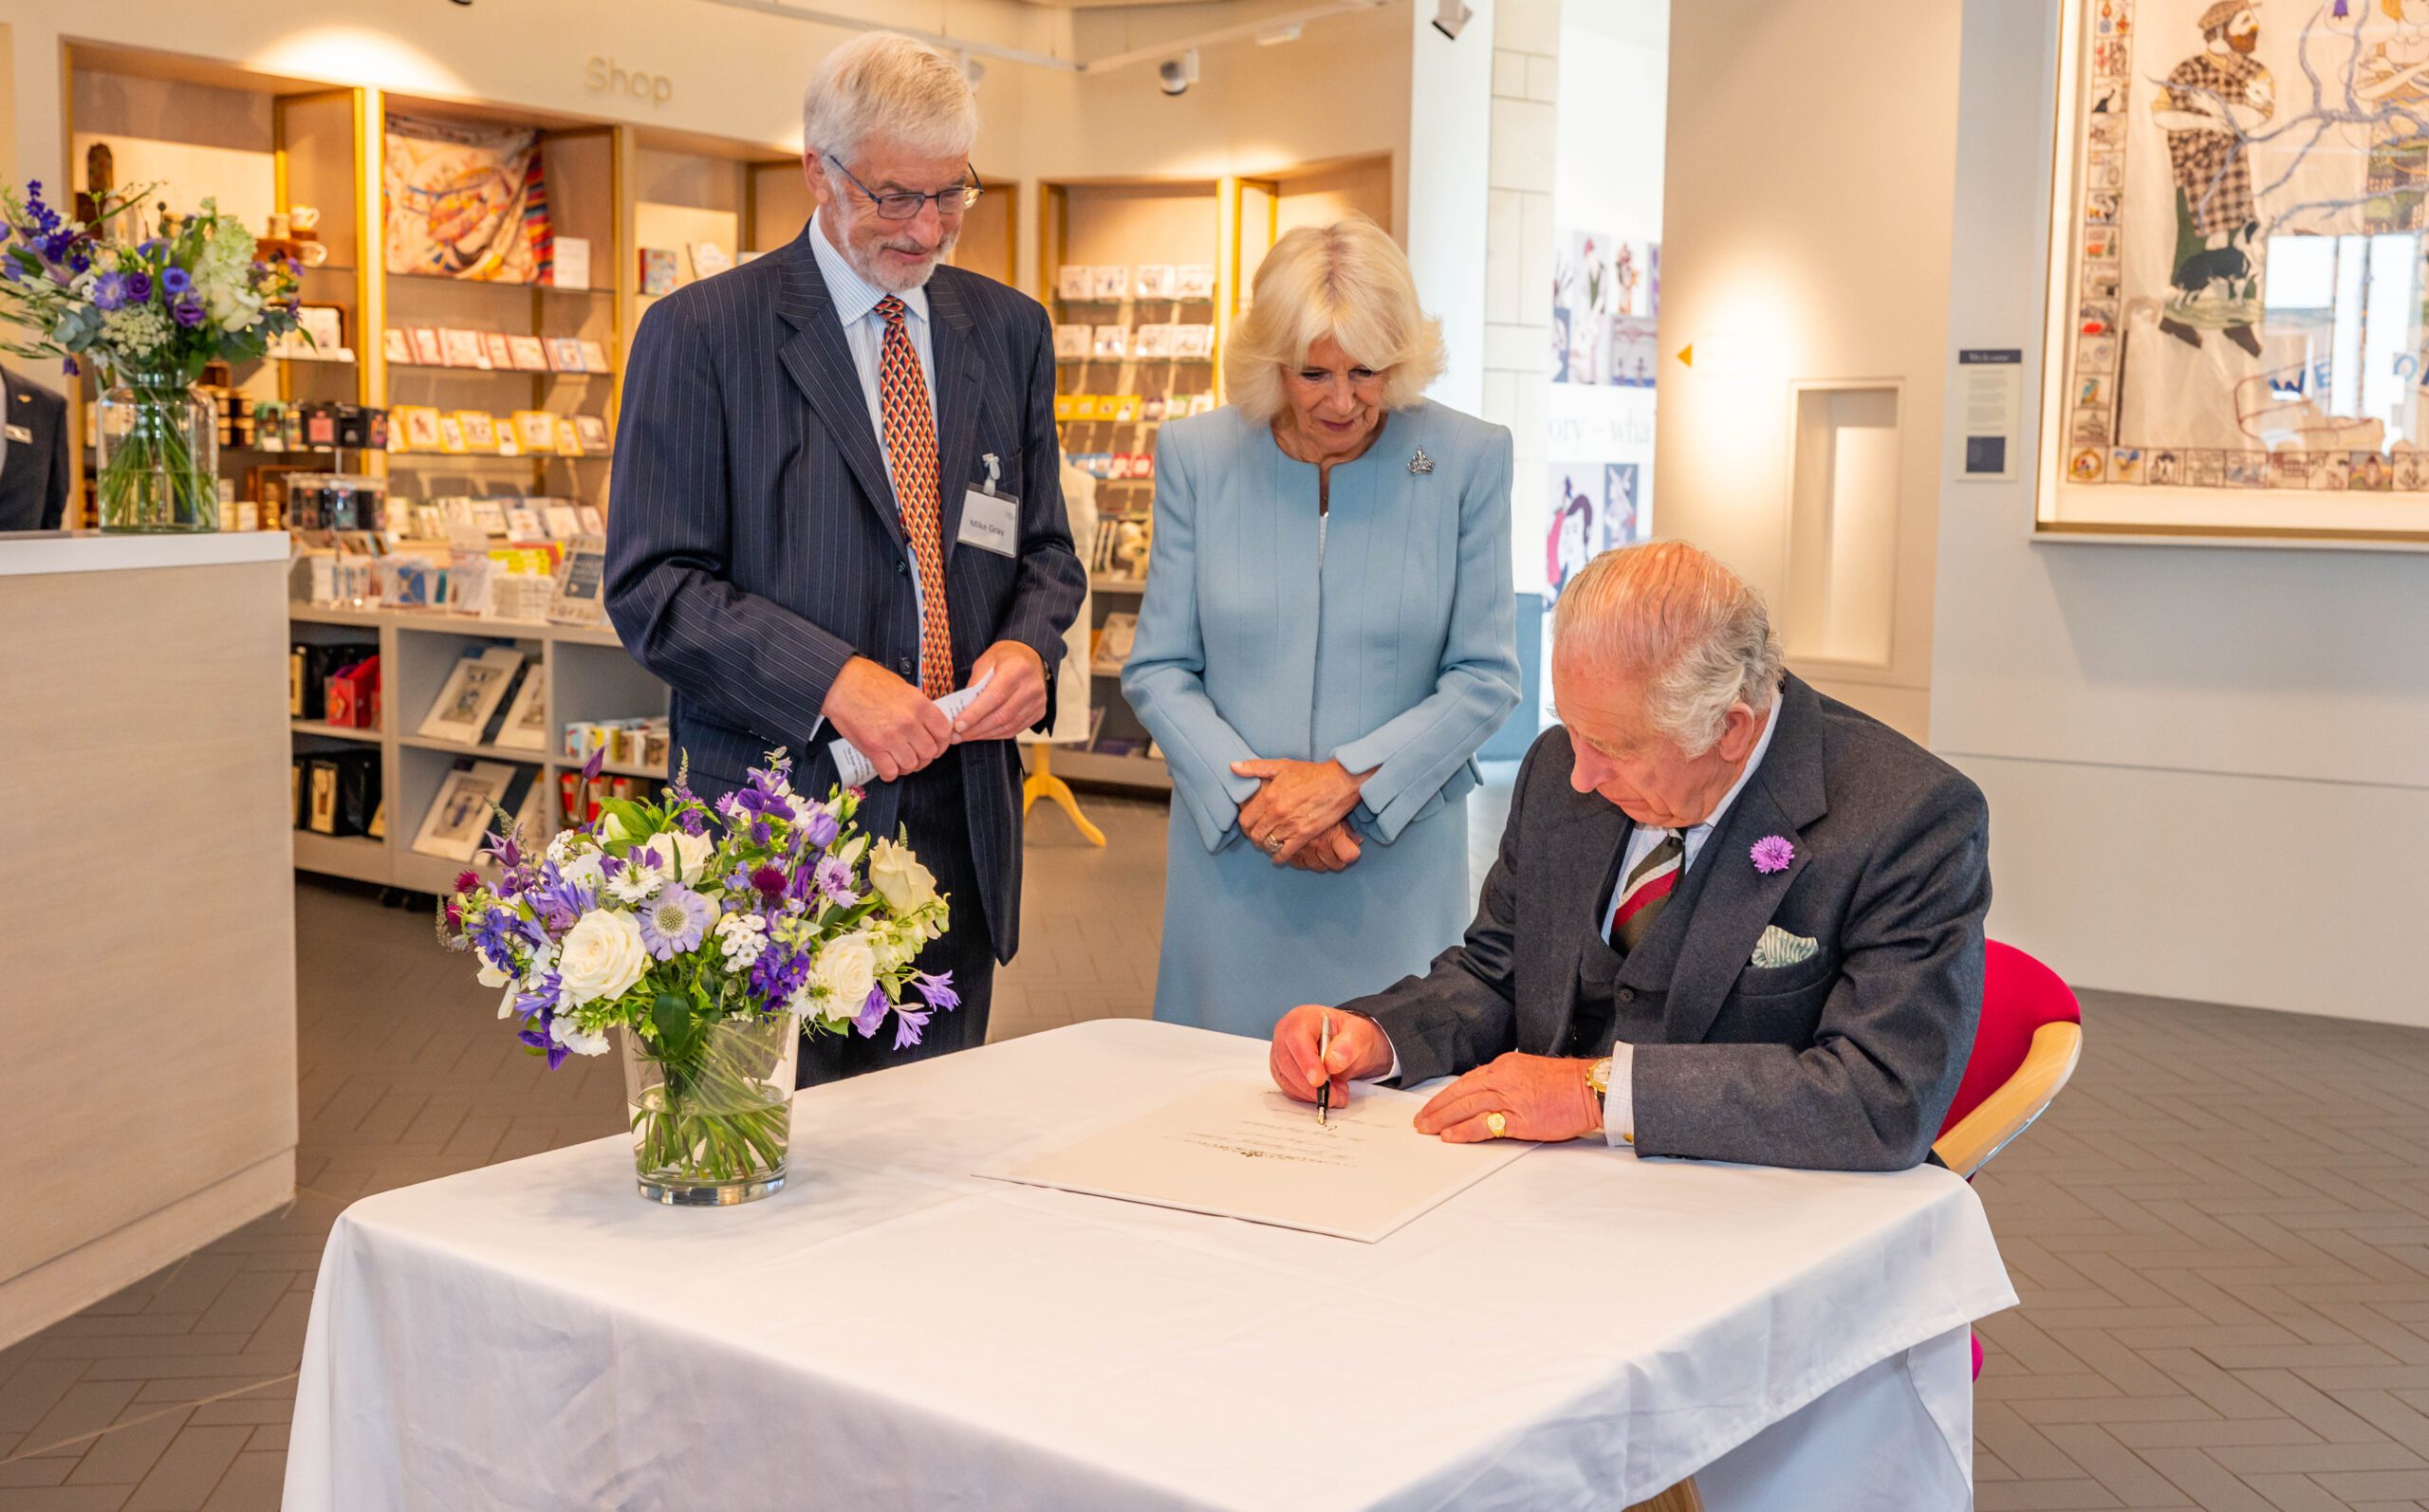 Their Majesties sign a commemorative certificate that will be hung alongside the commemorative panel in the Centre